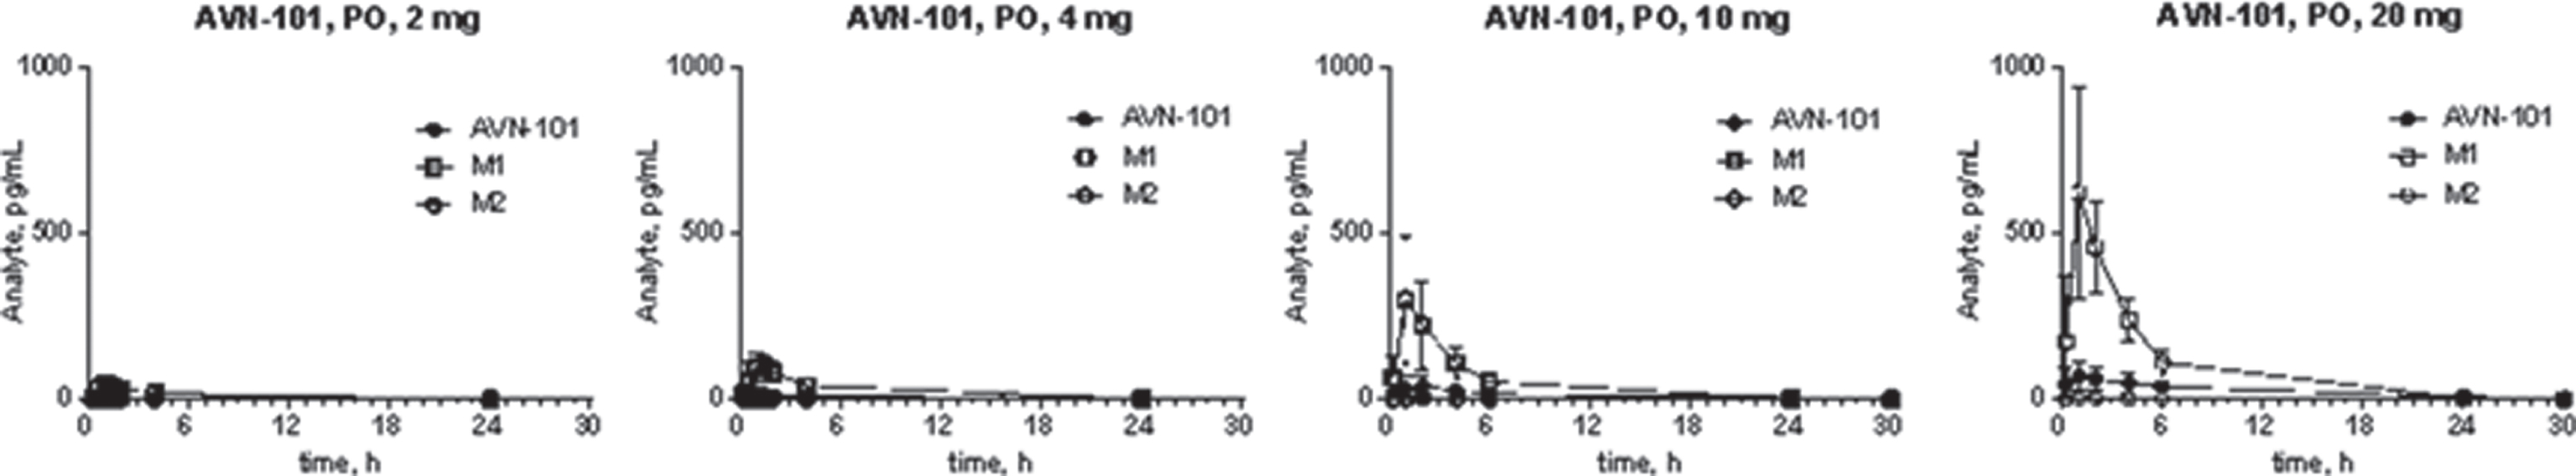 Kinetics of AVN-101 and its metabolites, M1 and M2, in plasma of human healthy volunteers after single AVN-101 PO administration at different doses.